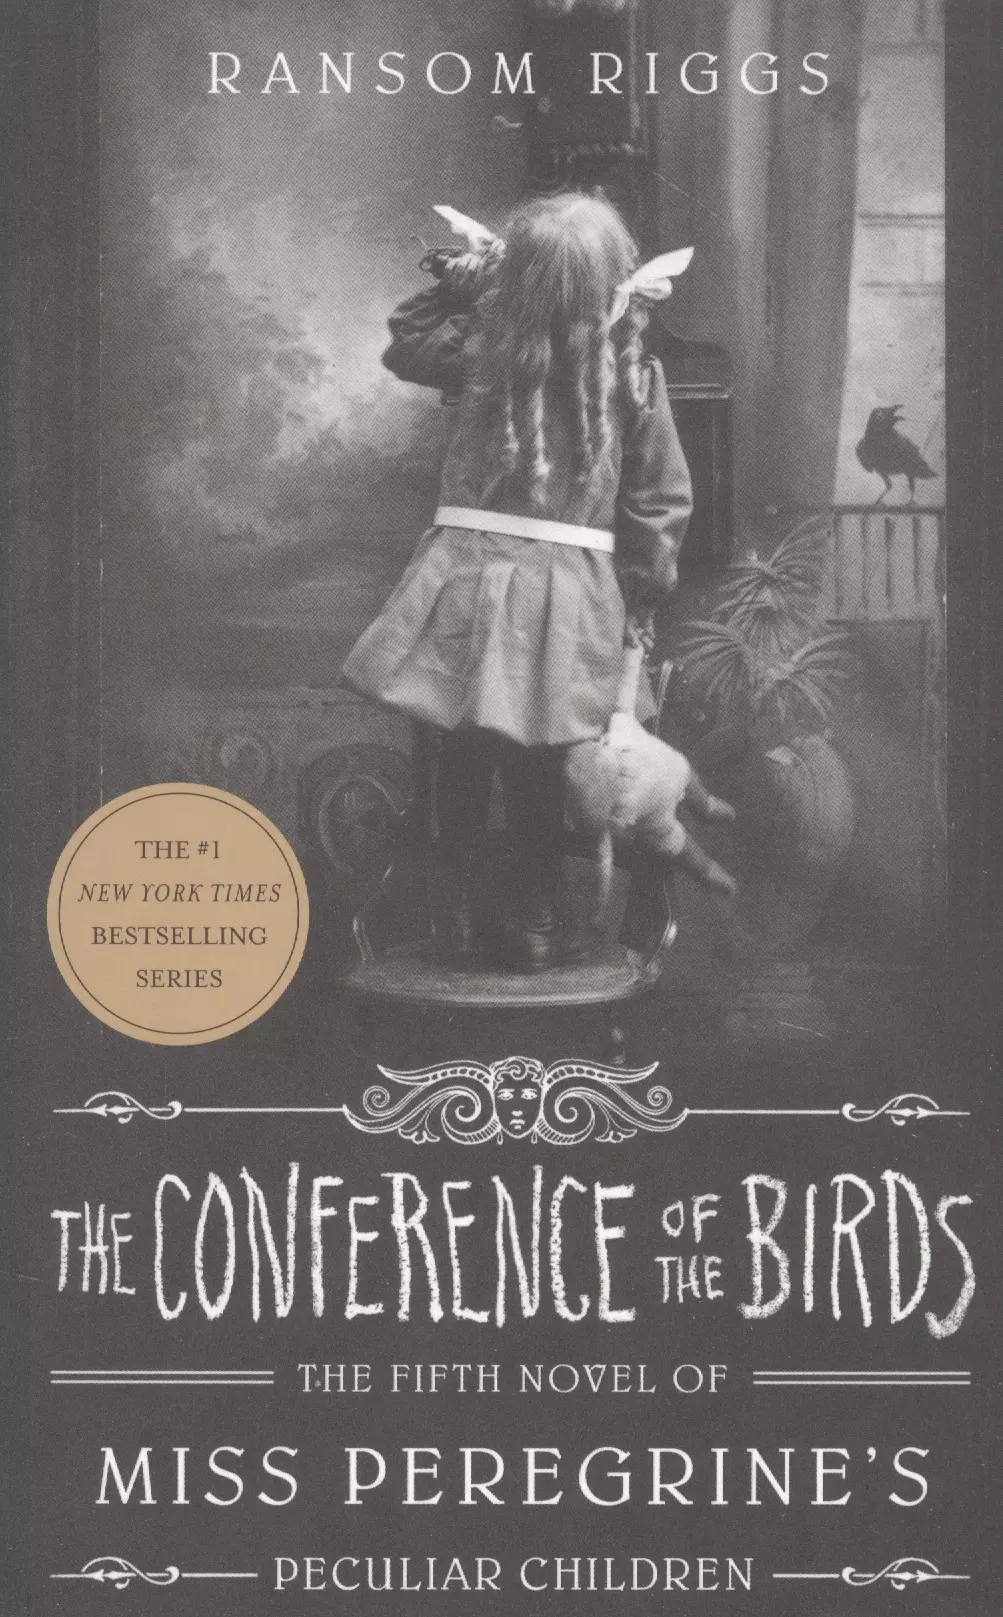 Riggs Ralph M. - The Conference of the Birds